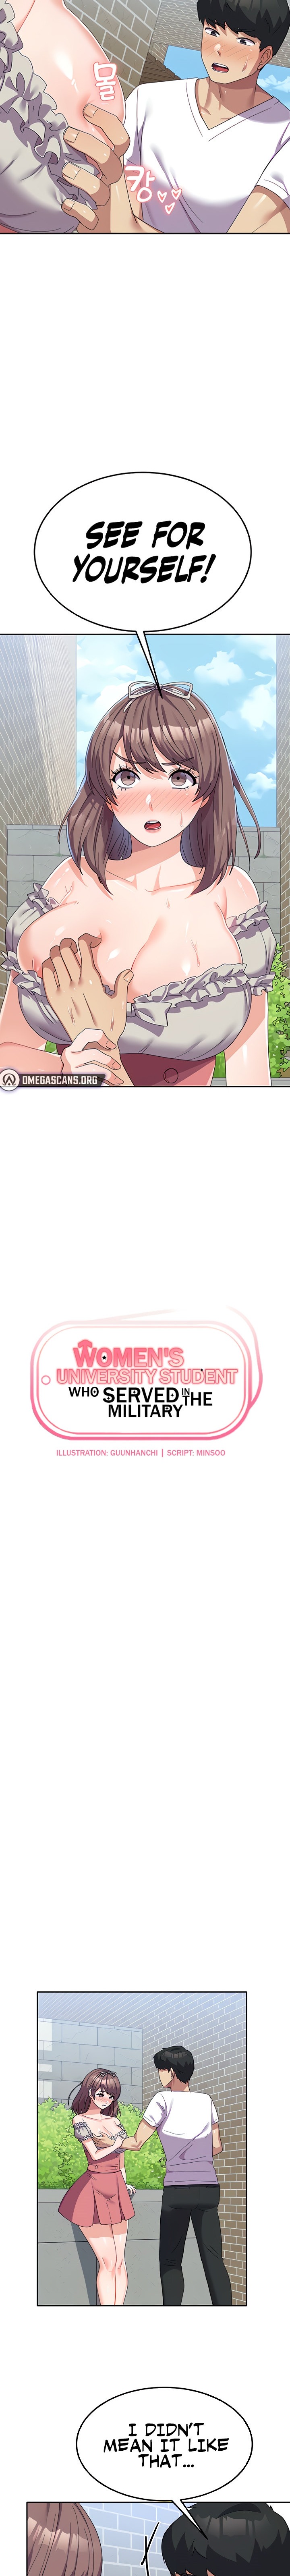 Women’s University Student who Served in the Military - Chapter 25 Page 2